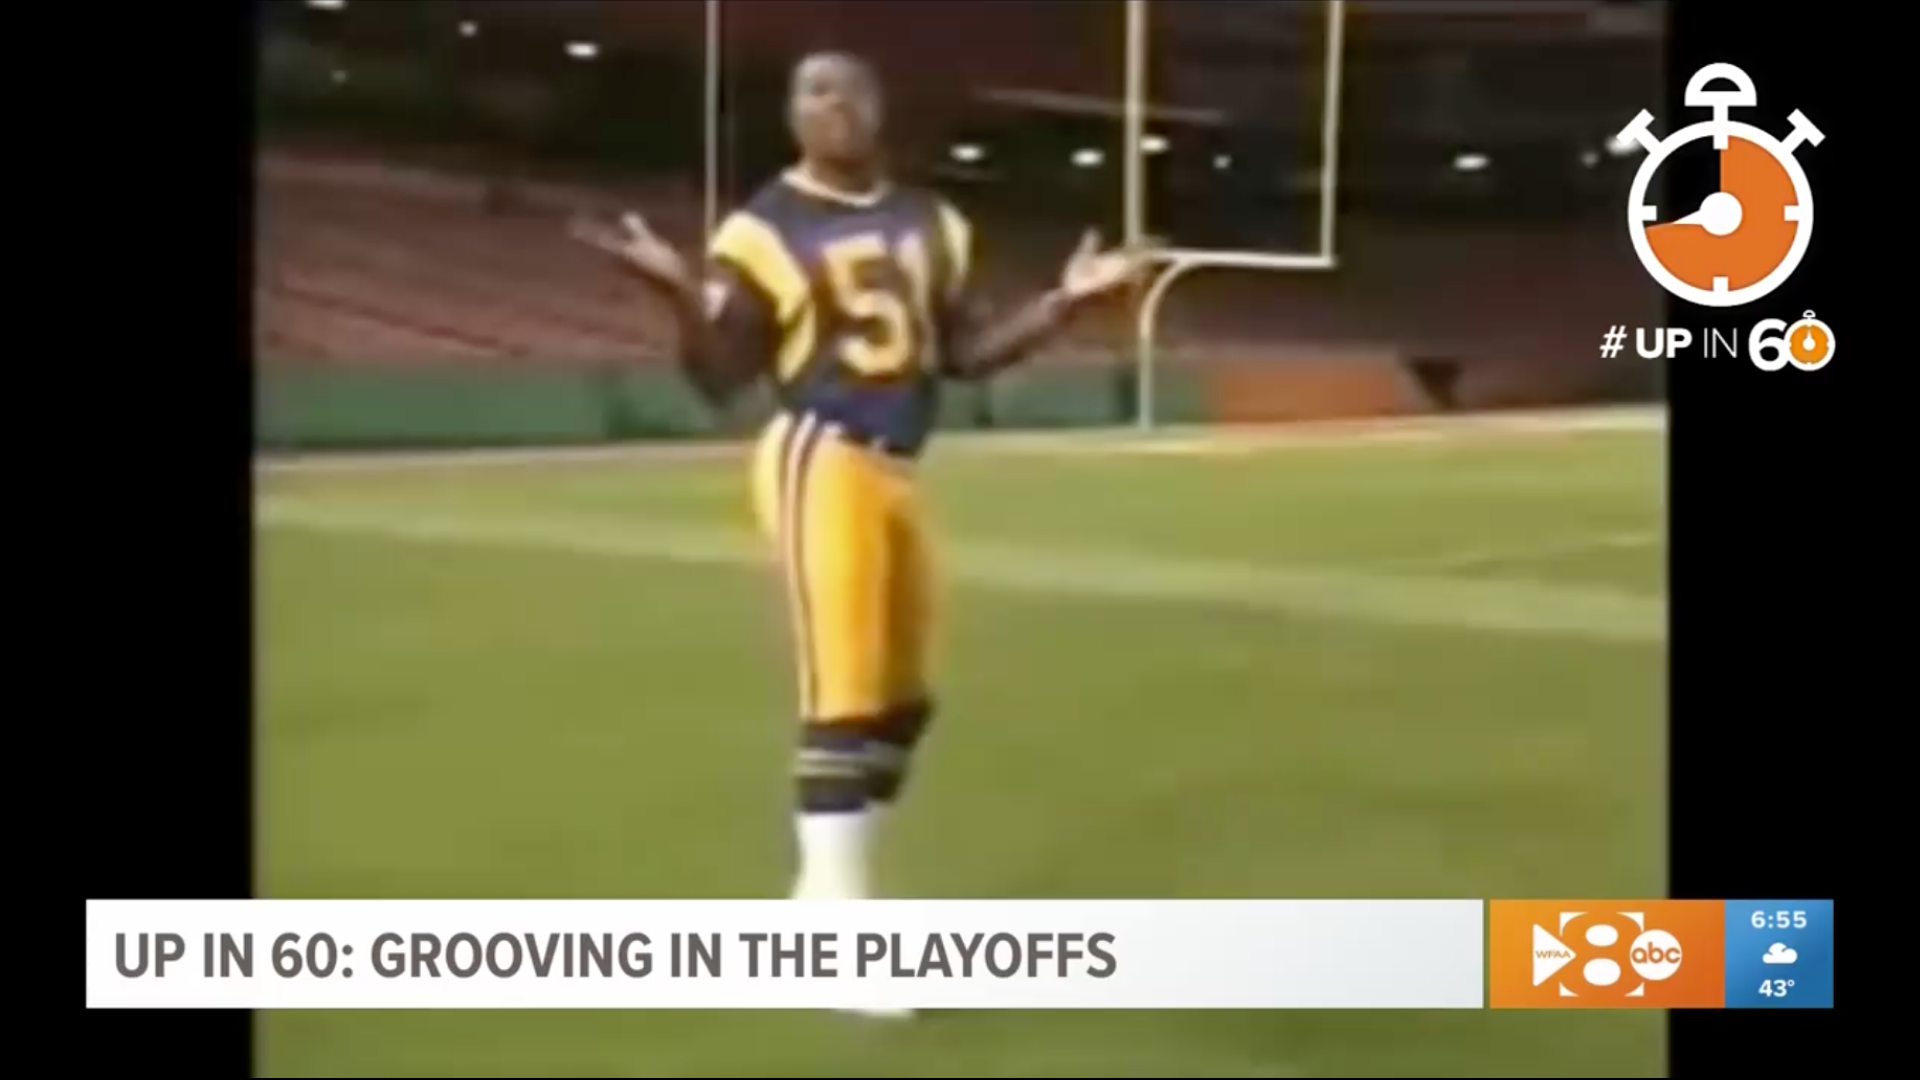 The Cowboys are grooving in the 2019 playoffs, but it's nothing compared to the grooving they did in the 80s!